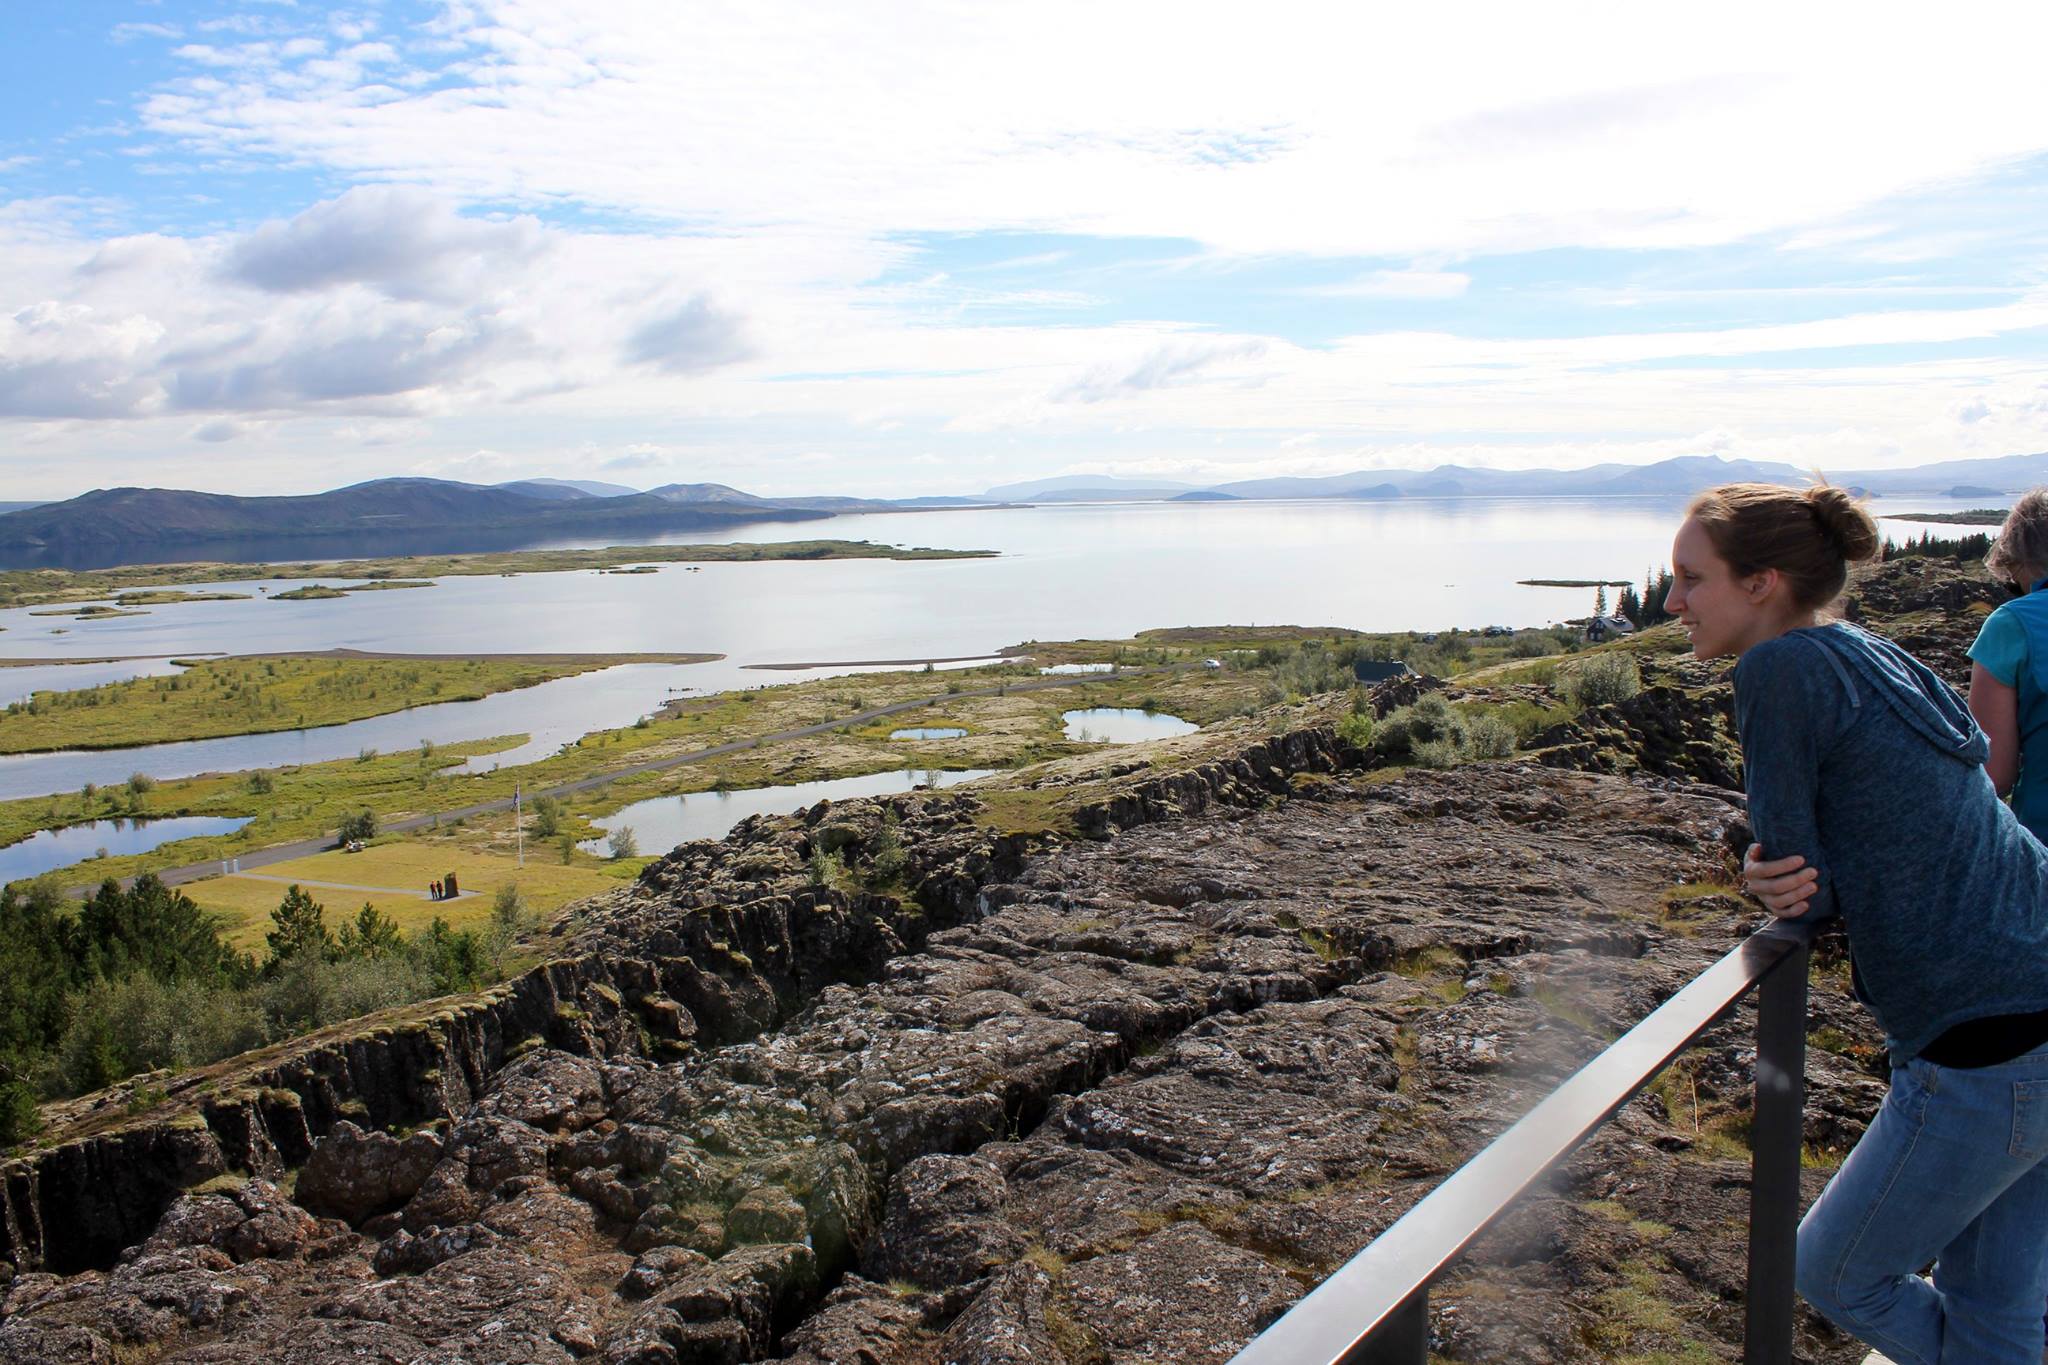 Þingvellir (Thingvellir) National Park where we could see the ridge separating two tectonic plates - North America and Europe.